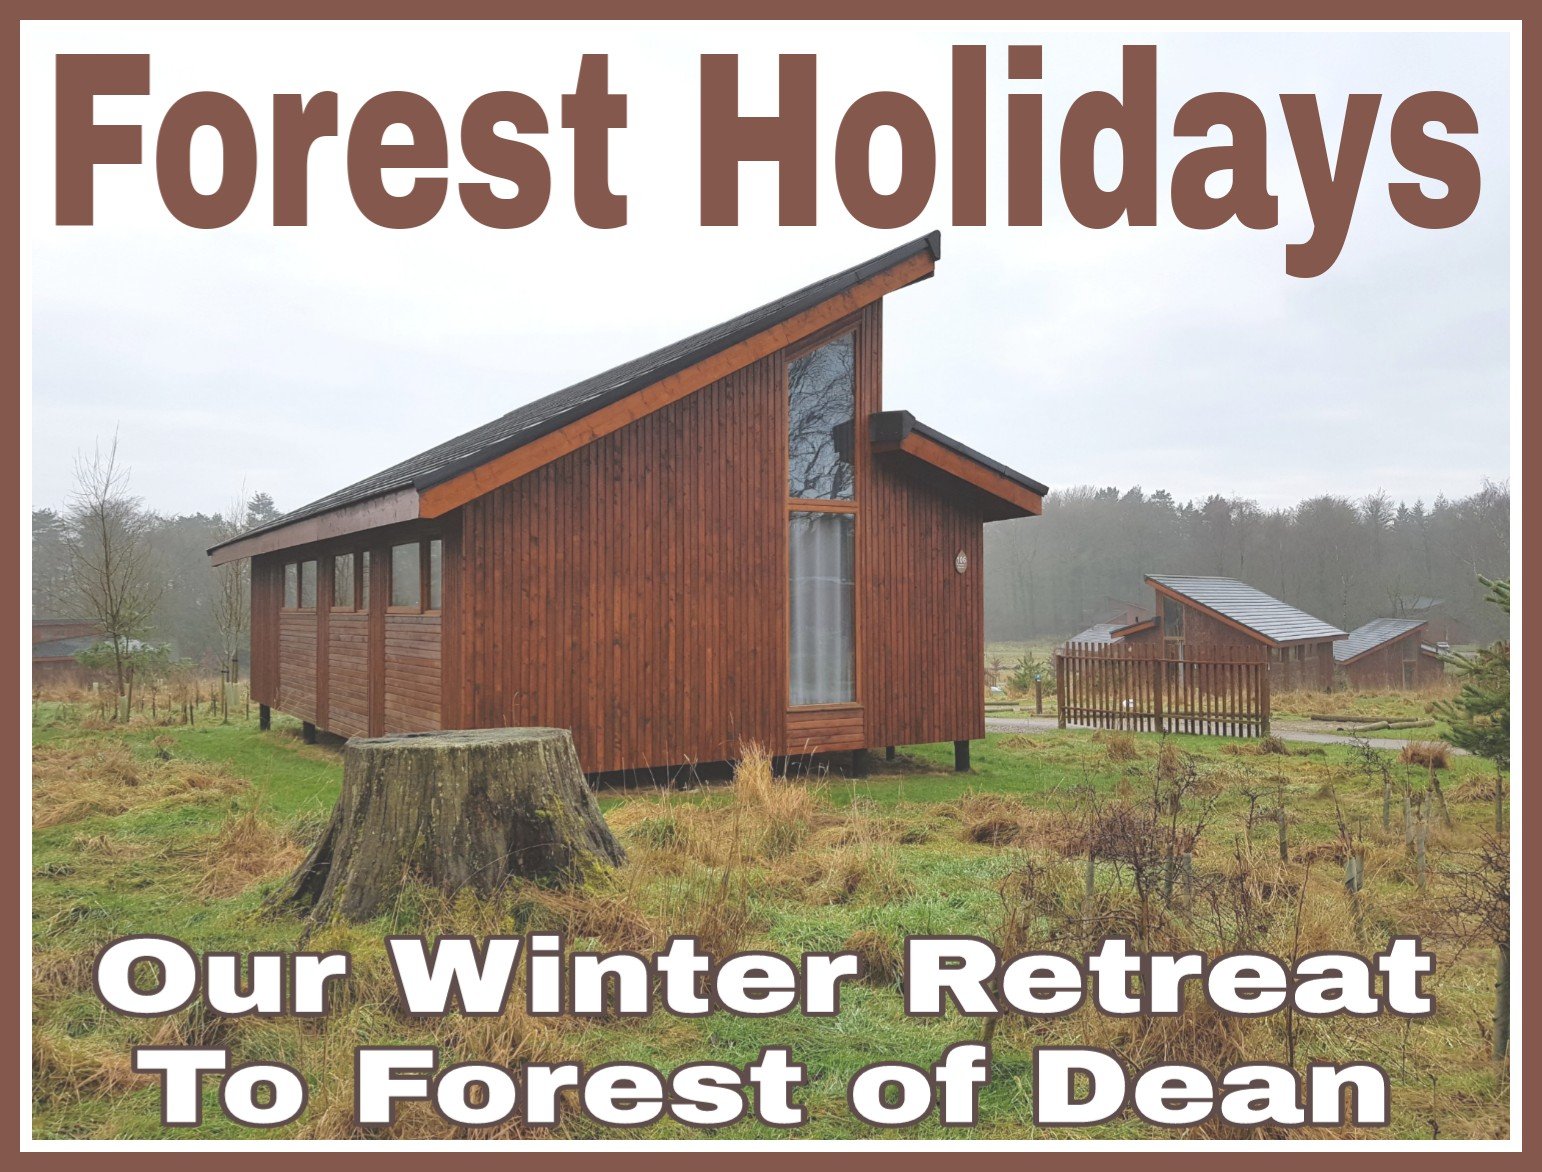 Title written on image of Forest Holidays cabin.